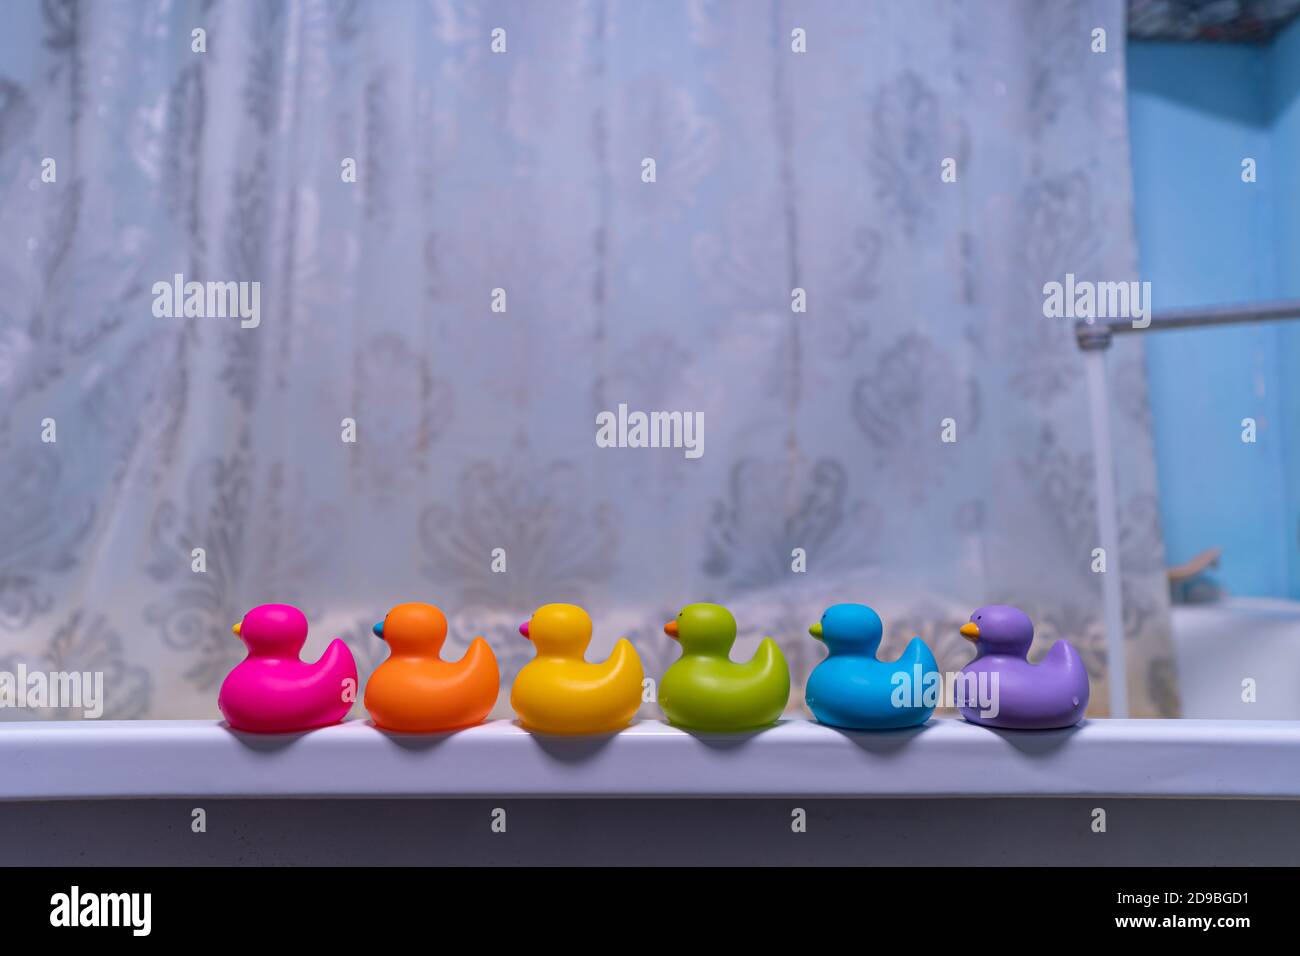 rubber toys in the bathroom, yellow duck and bath decor elements Stock Photo